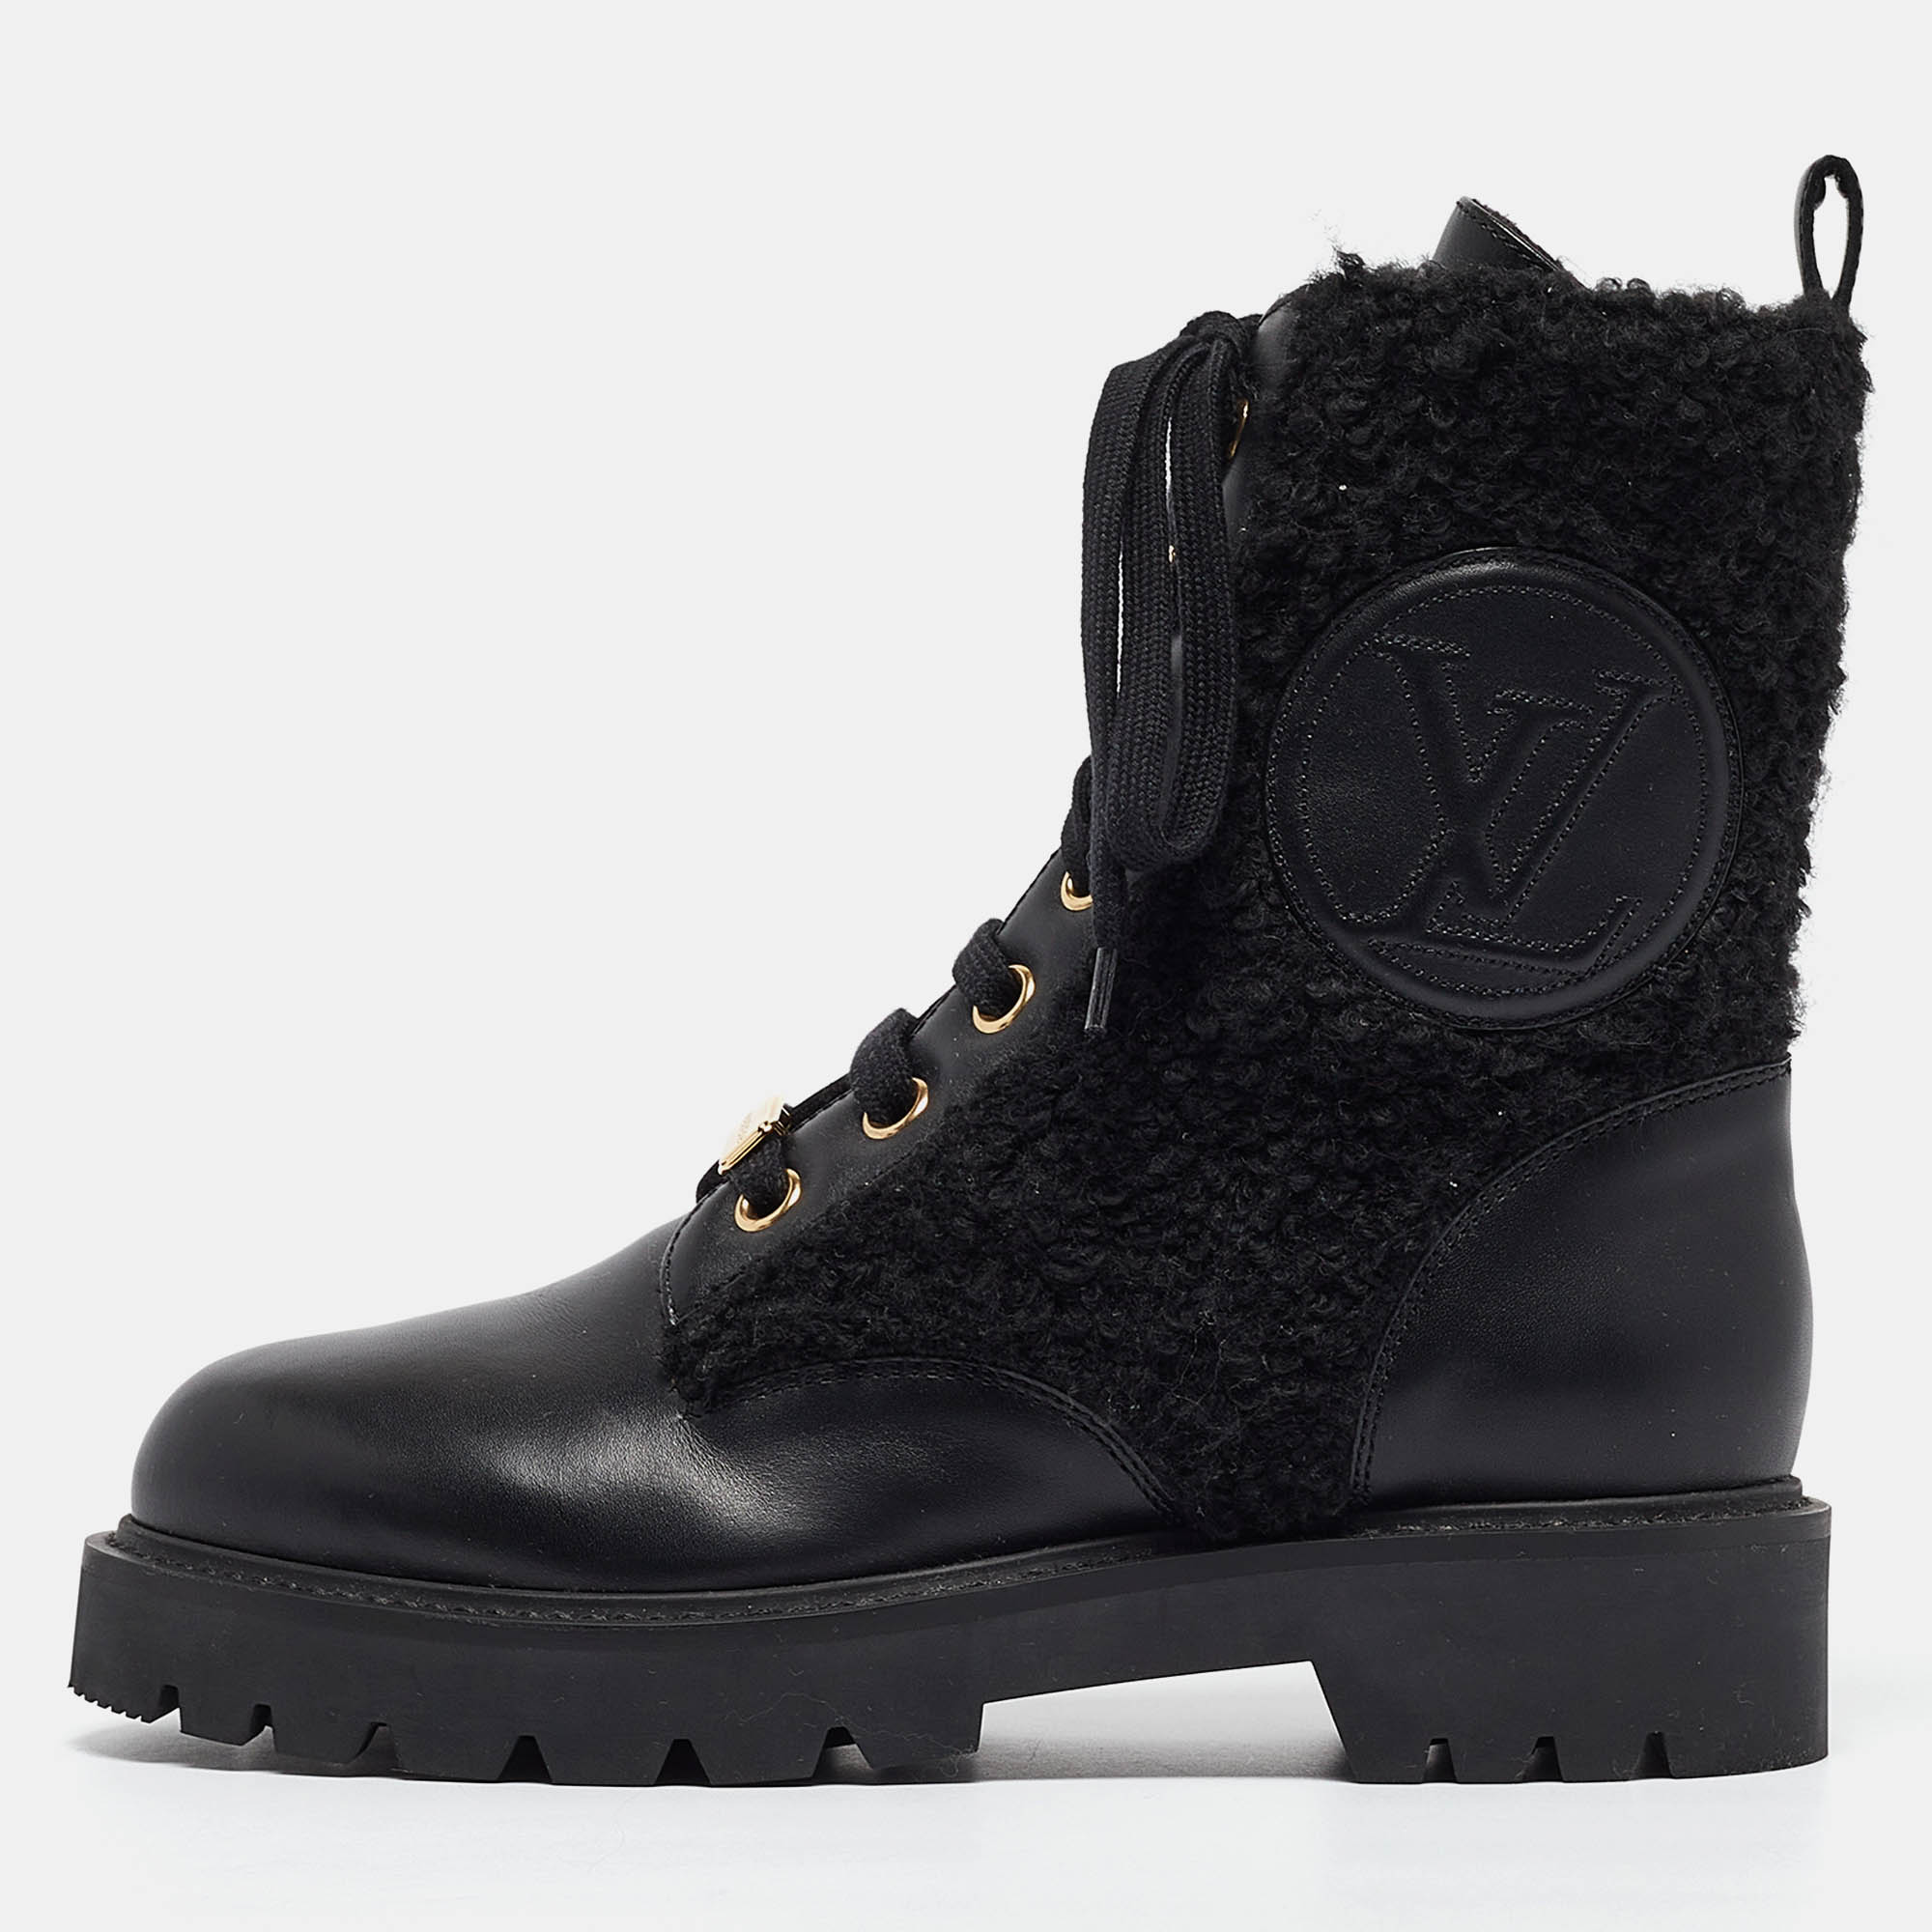 

Louis Vuitton Black Leather and Shearling Fur Territory Ranger Boots Size